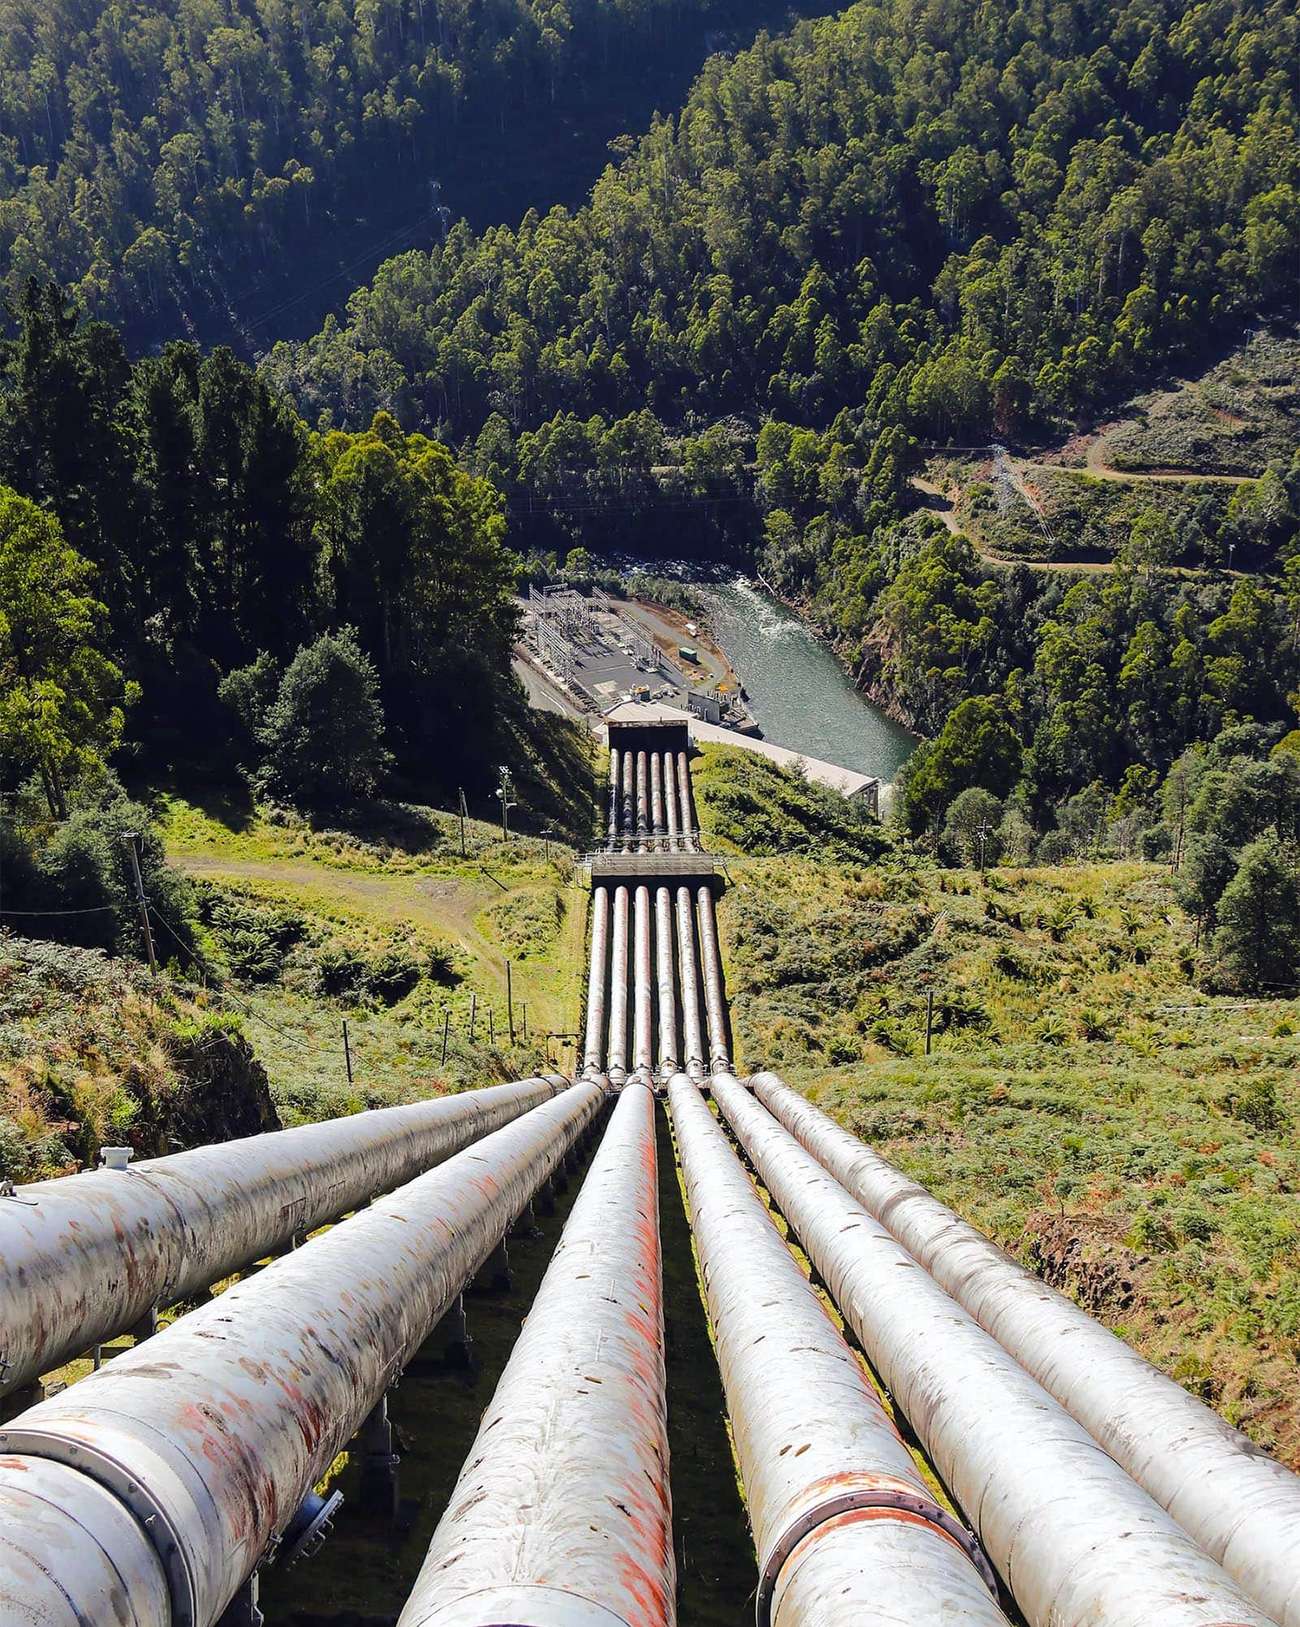 Six water pipelines coming down a hill into a forested valley